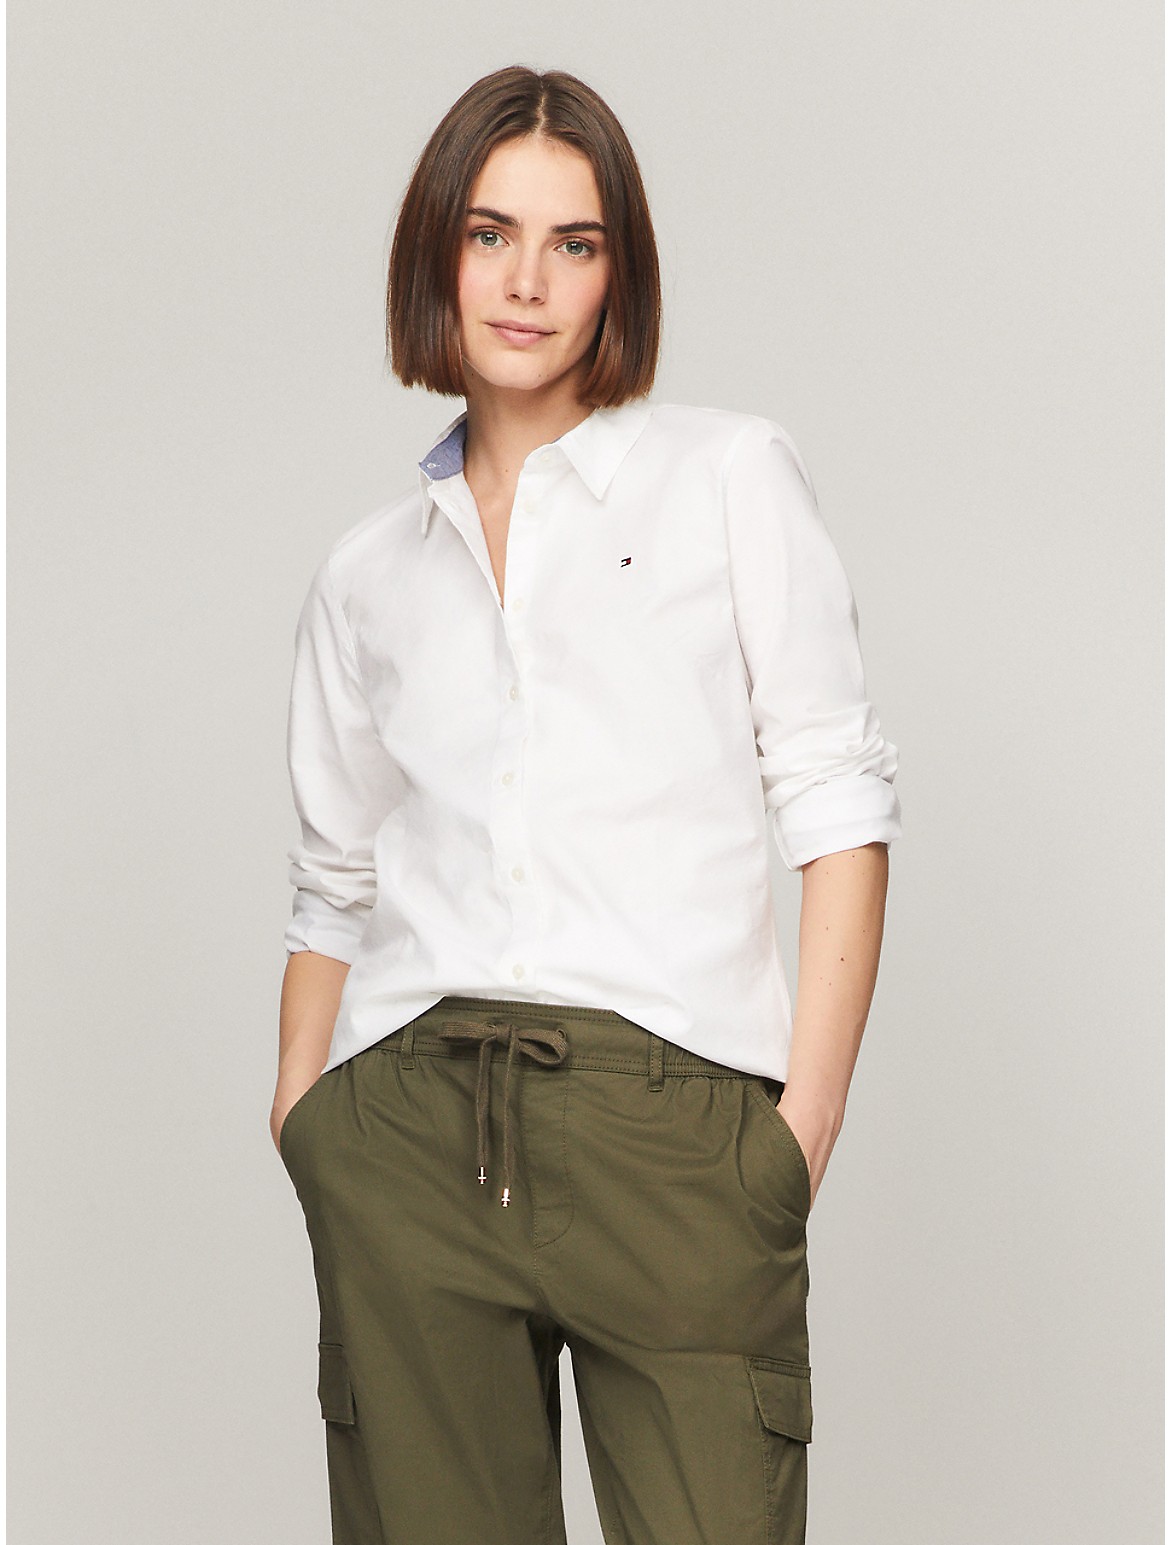 TOMMY HILFIGER Shirts for | ModeSens Women